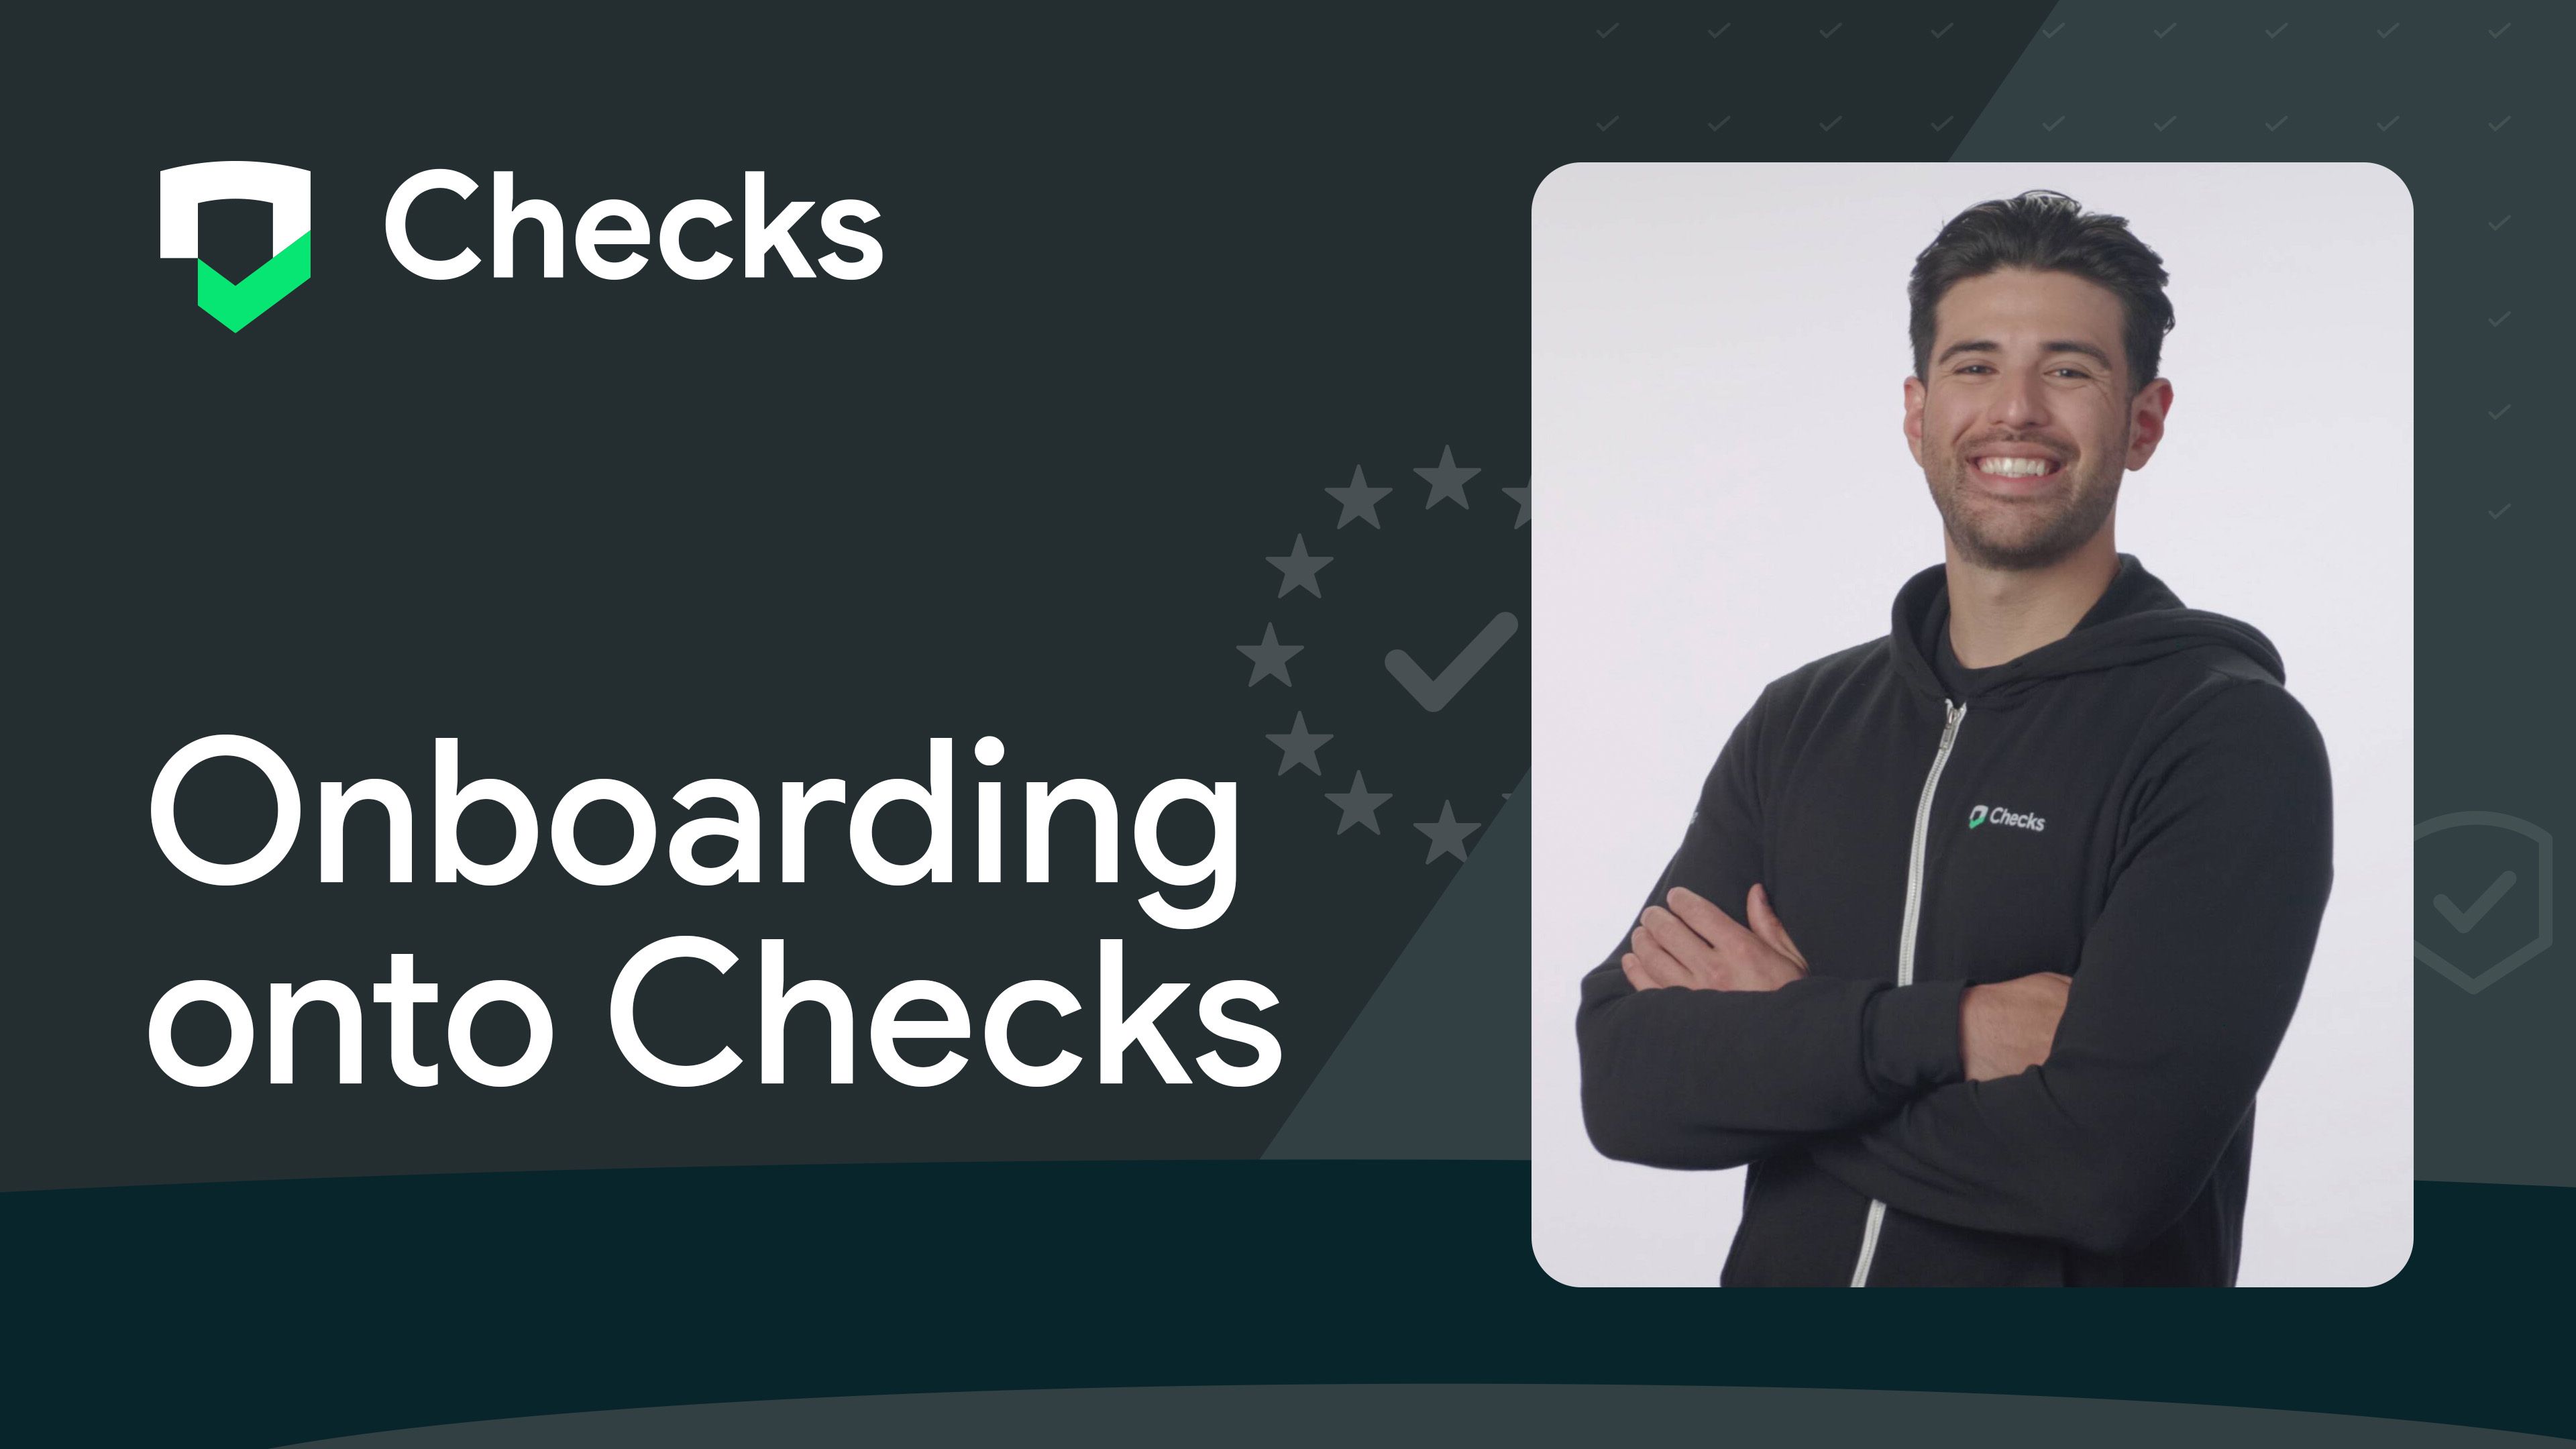 Getting started with Checks